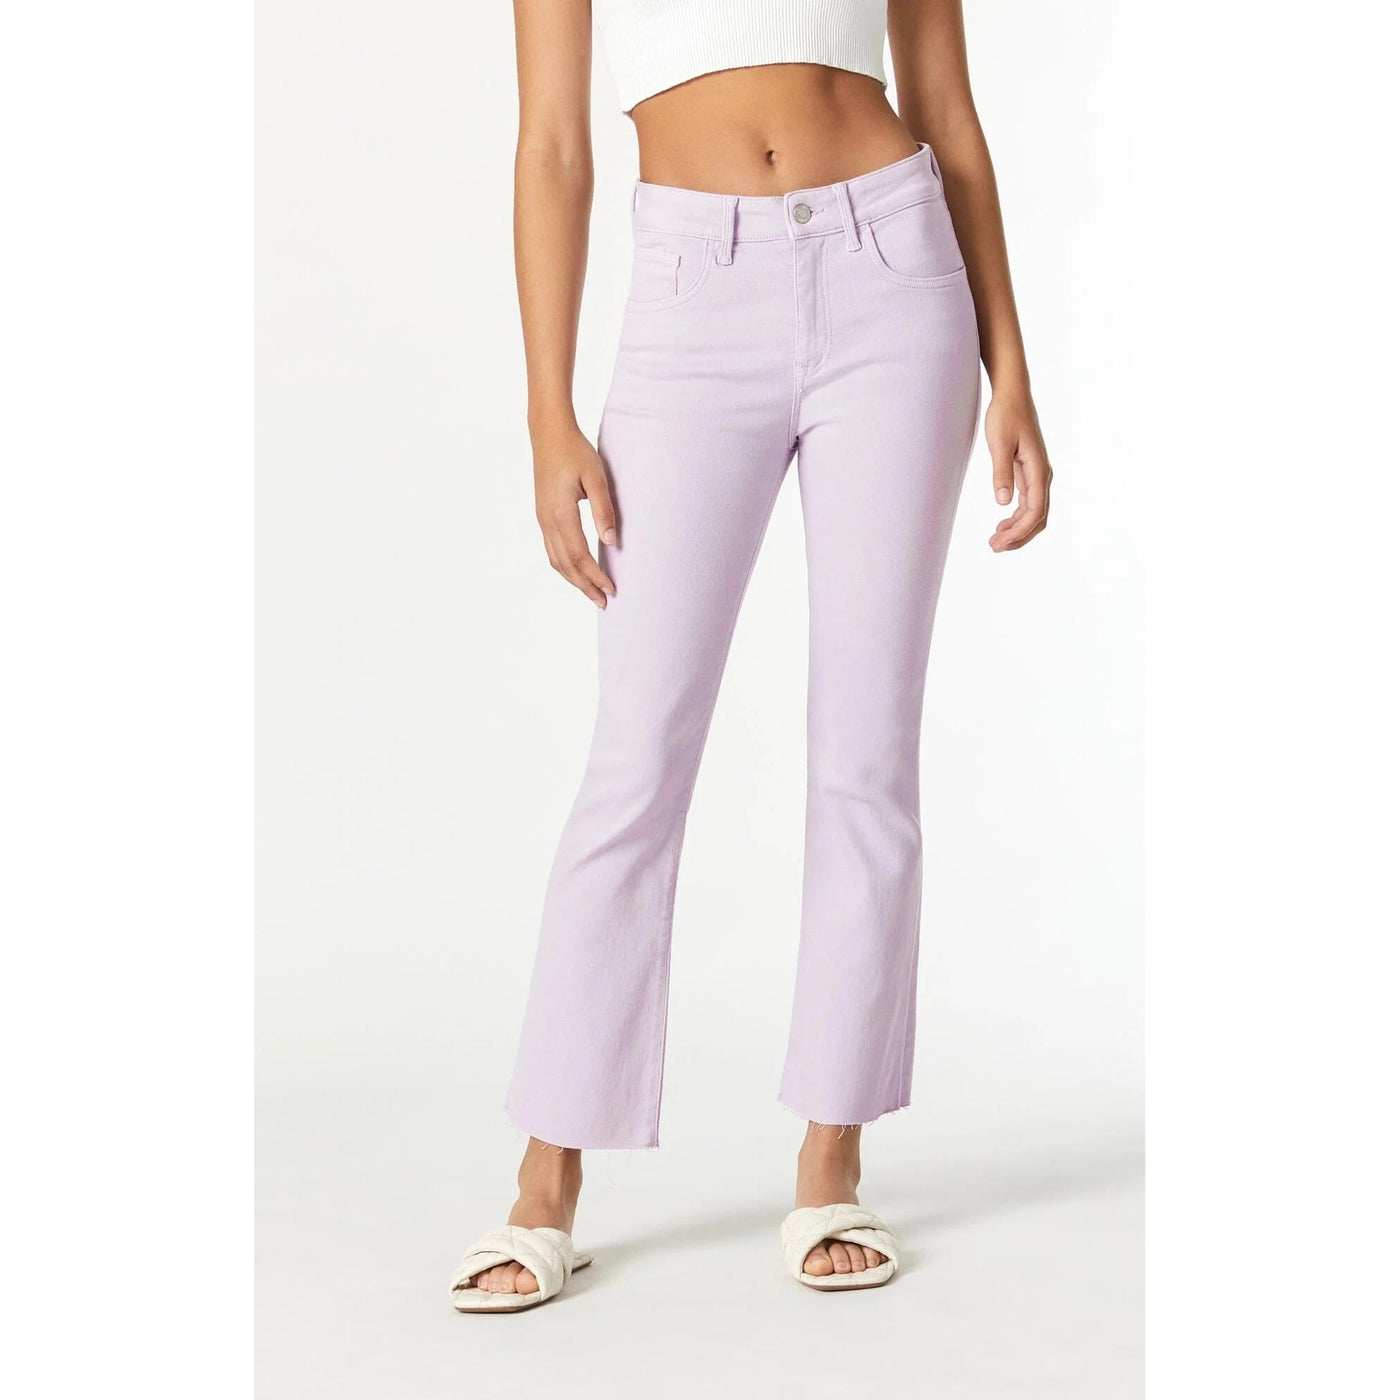 Mavi Women's Anika High Rise Cropped Flare Jeans-Women's Clothing-Fair Orchid-25/0-Kevin's Fine Outdoor Gear & Apparel